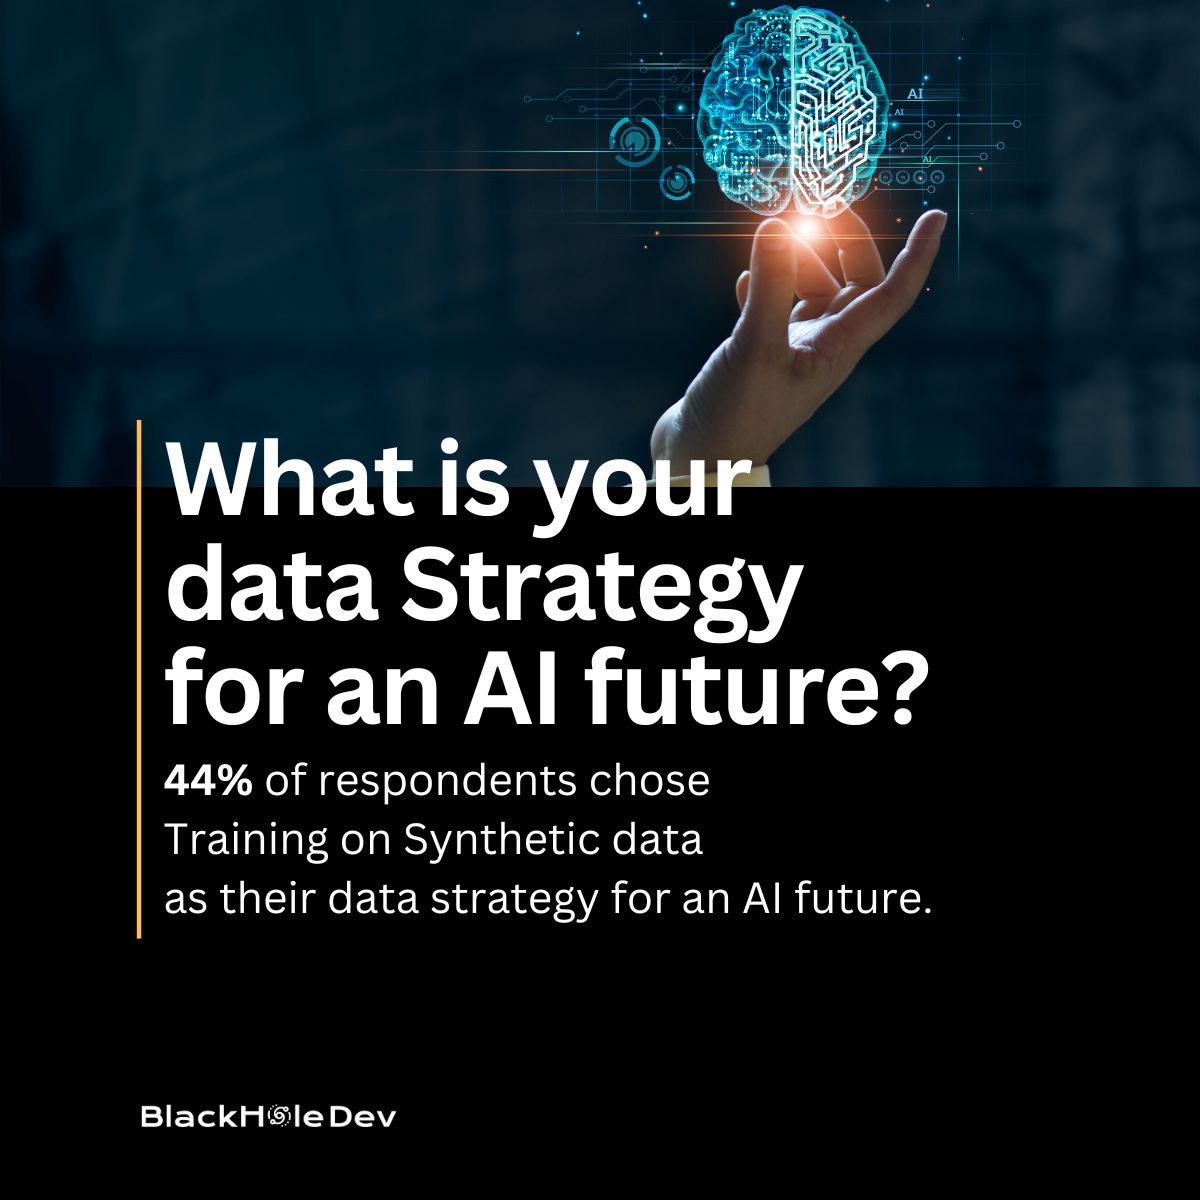 Exciting times ahead for #AI and #DataStrategy at Black Hole Dev! 🚀 What's your game plan for leveraging data to fuel AI innovations in the future? Let's navigate the cosmos of possibilities together! 🛰️ #BlackHoleDev #TechTalk #DataScience #FutureTech